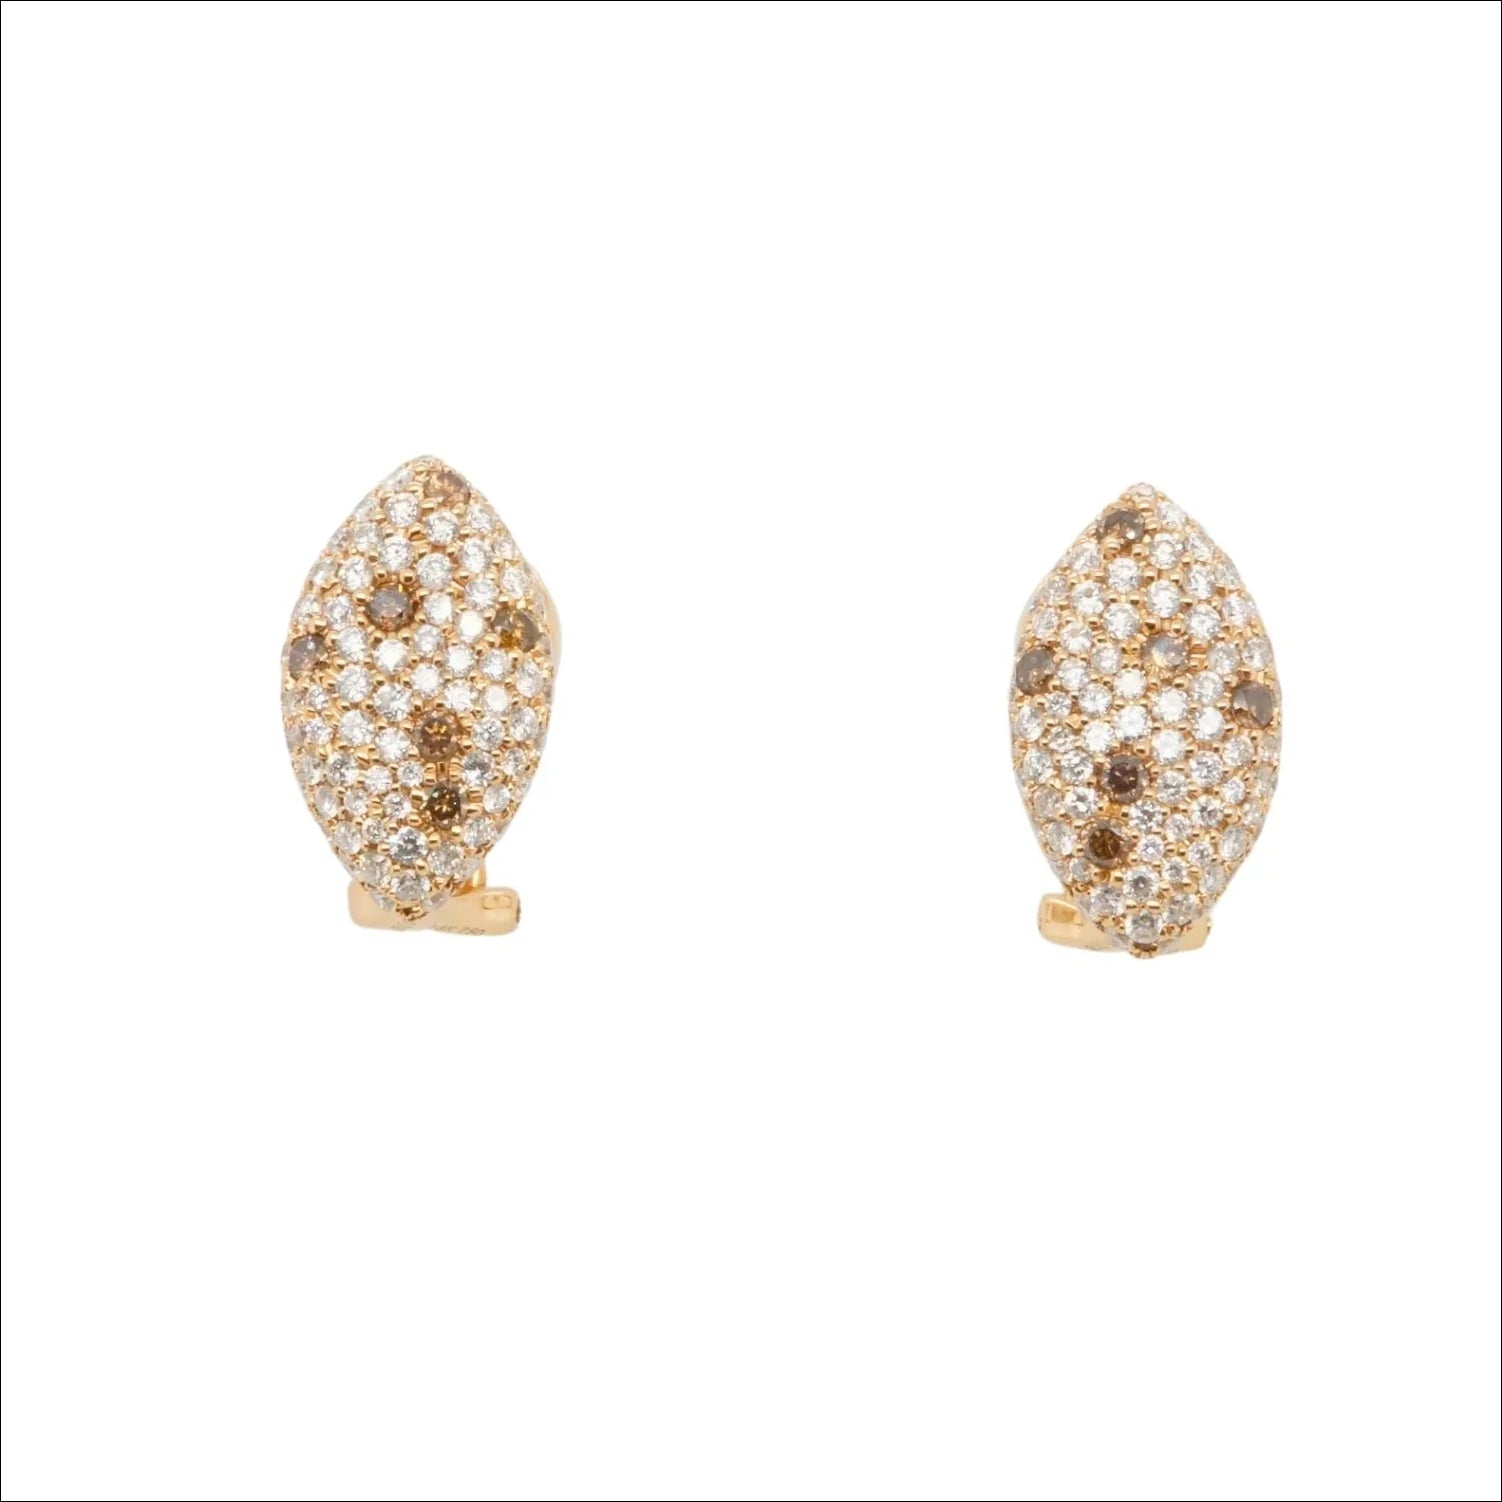 Rose Gold Champagne Diamond Earrings: 18k Beauty | Home page